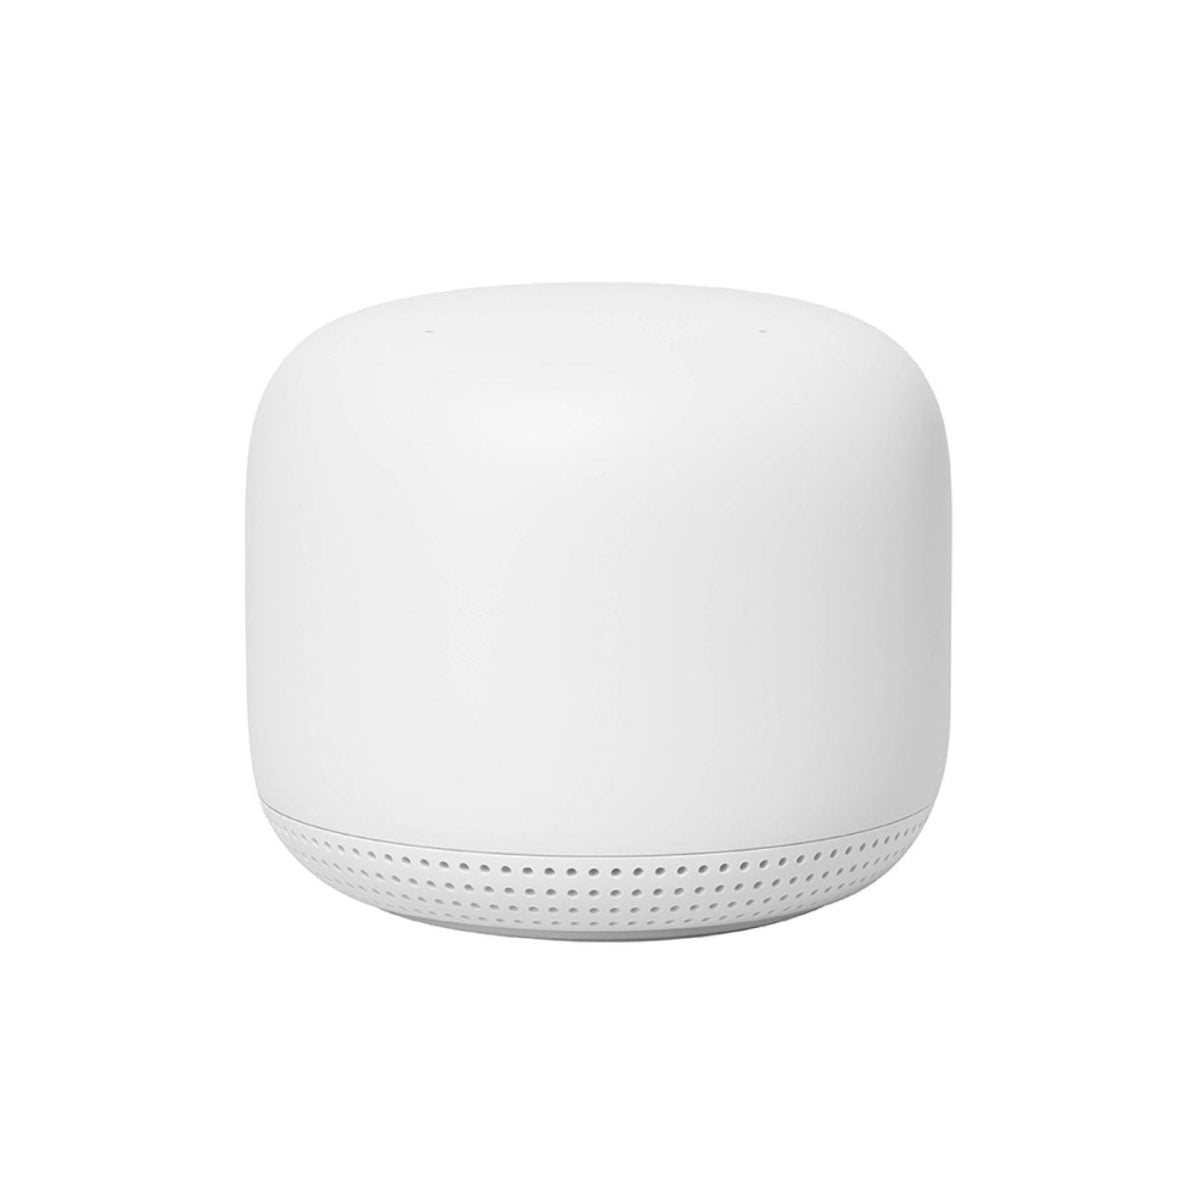 Dsd2212 05 Scaled Google Https://Youtu.be/Wsduj9Sm78K Google Nest Wifi Router And 2 Access Points (2020)